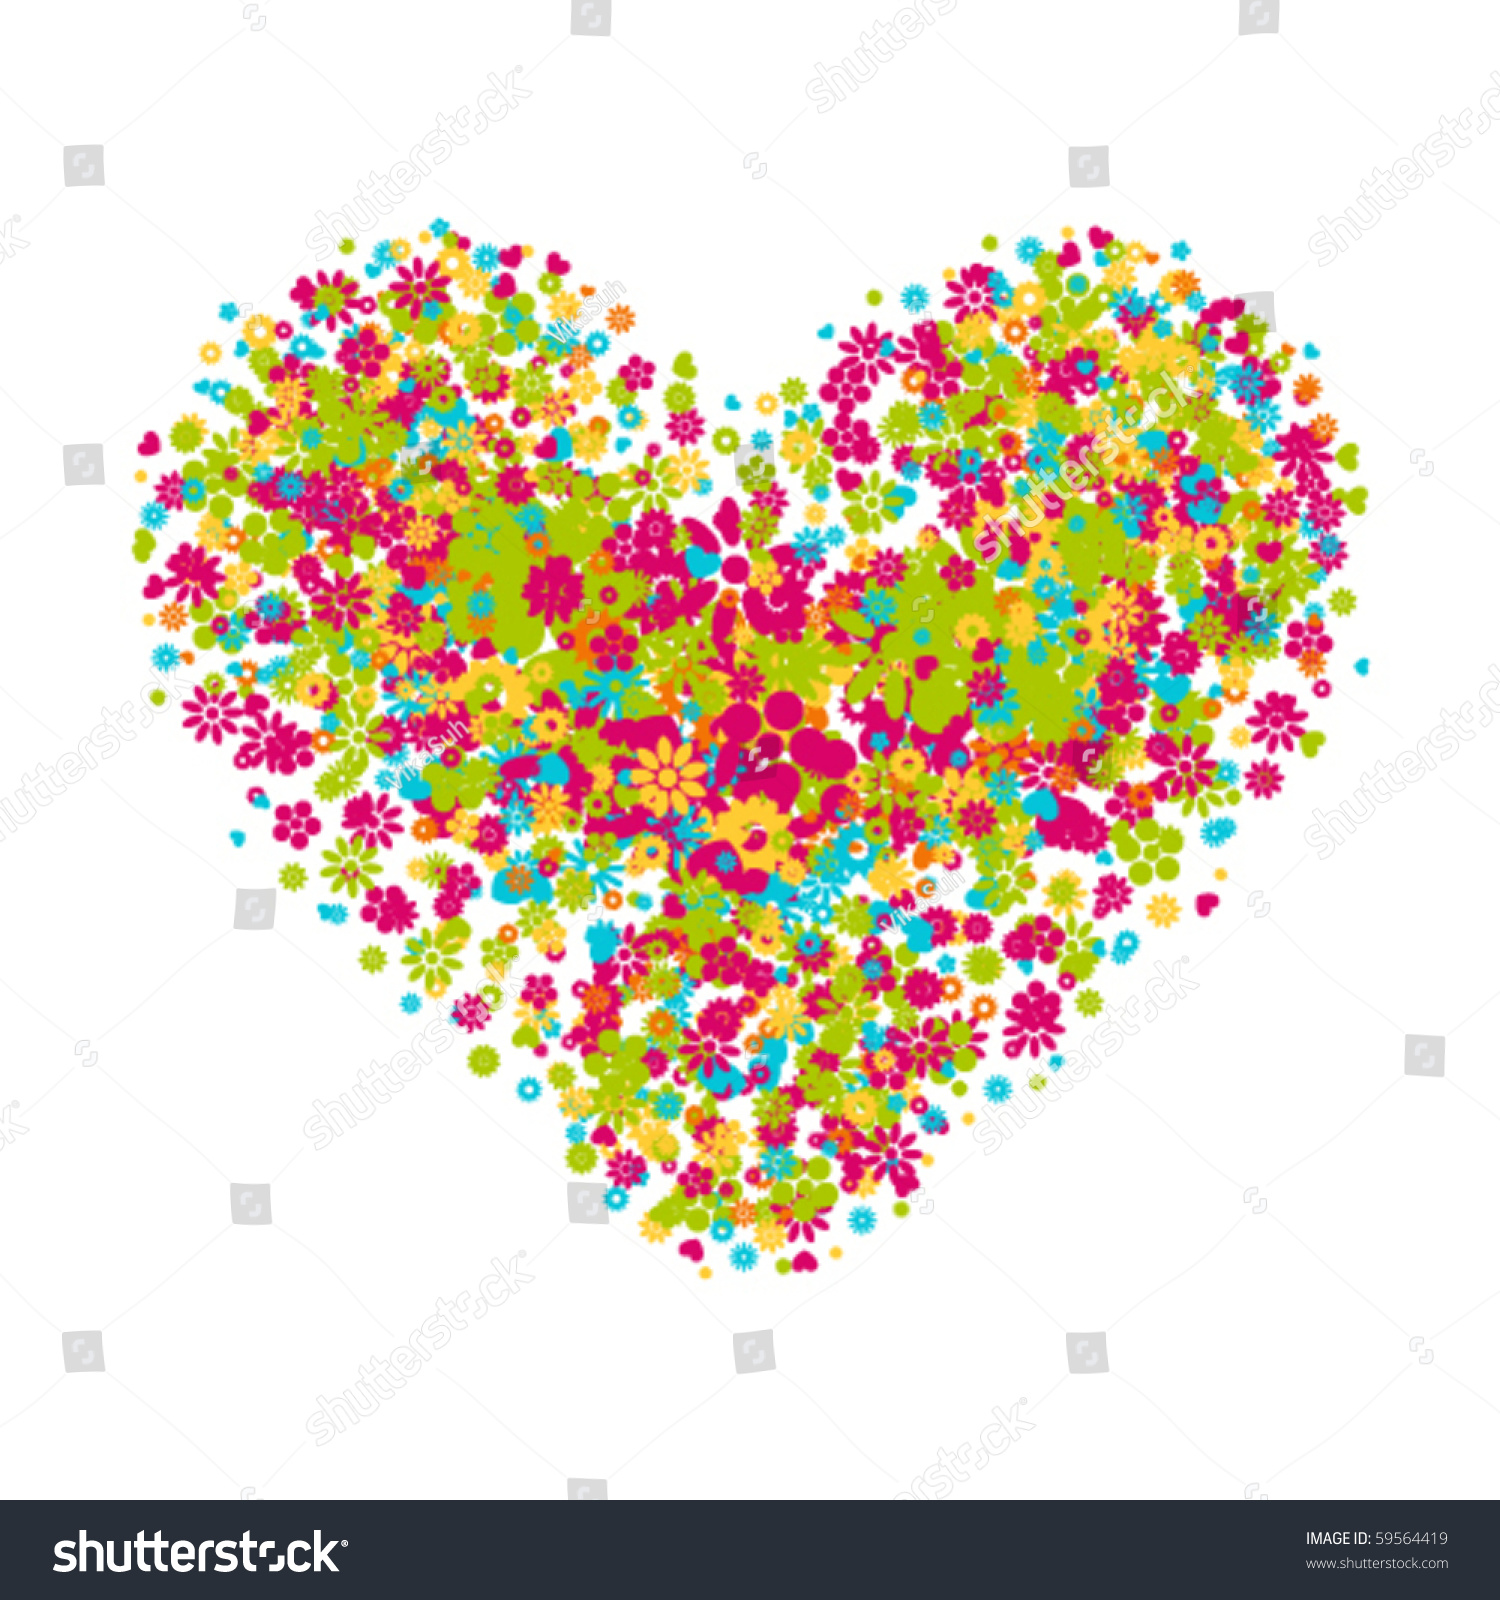 Floral Heart Shape Vector Background Stock Vector (Royalty Free ...